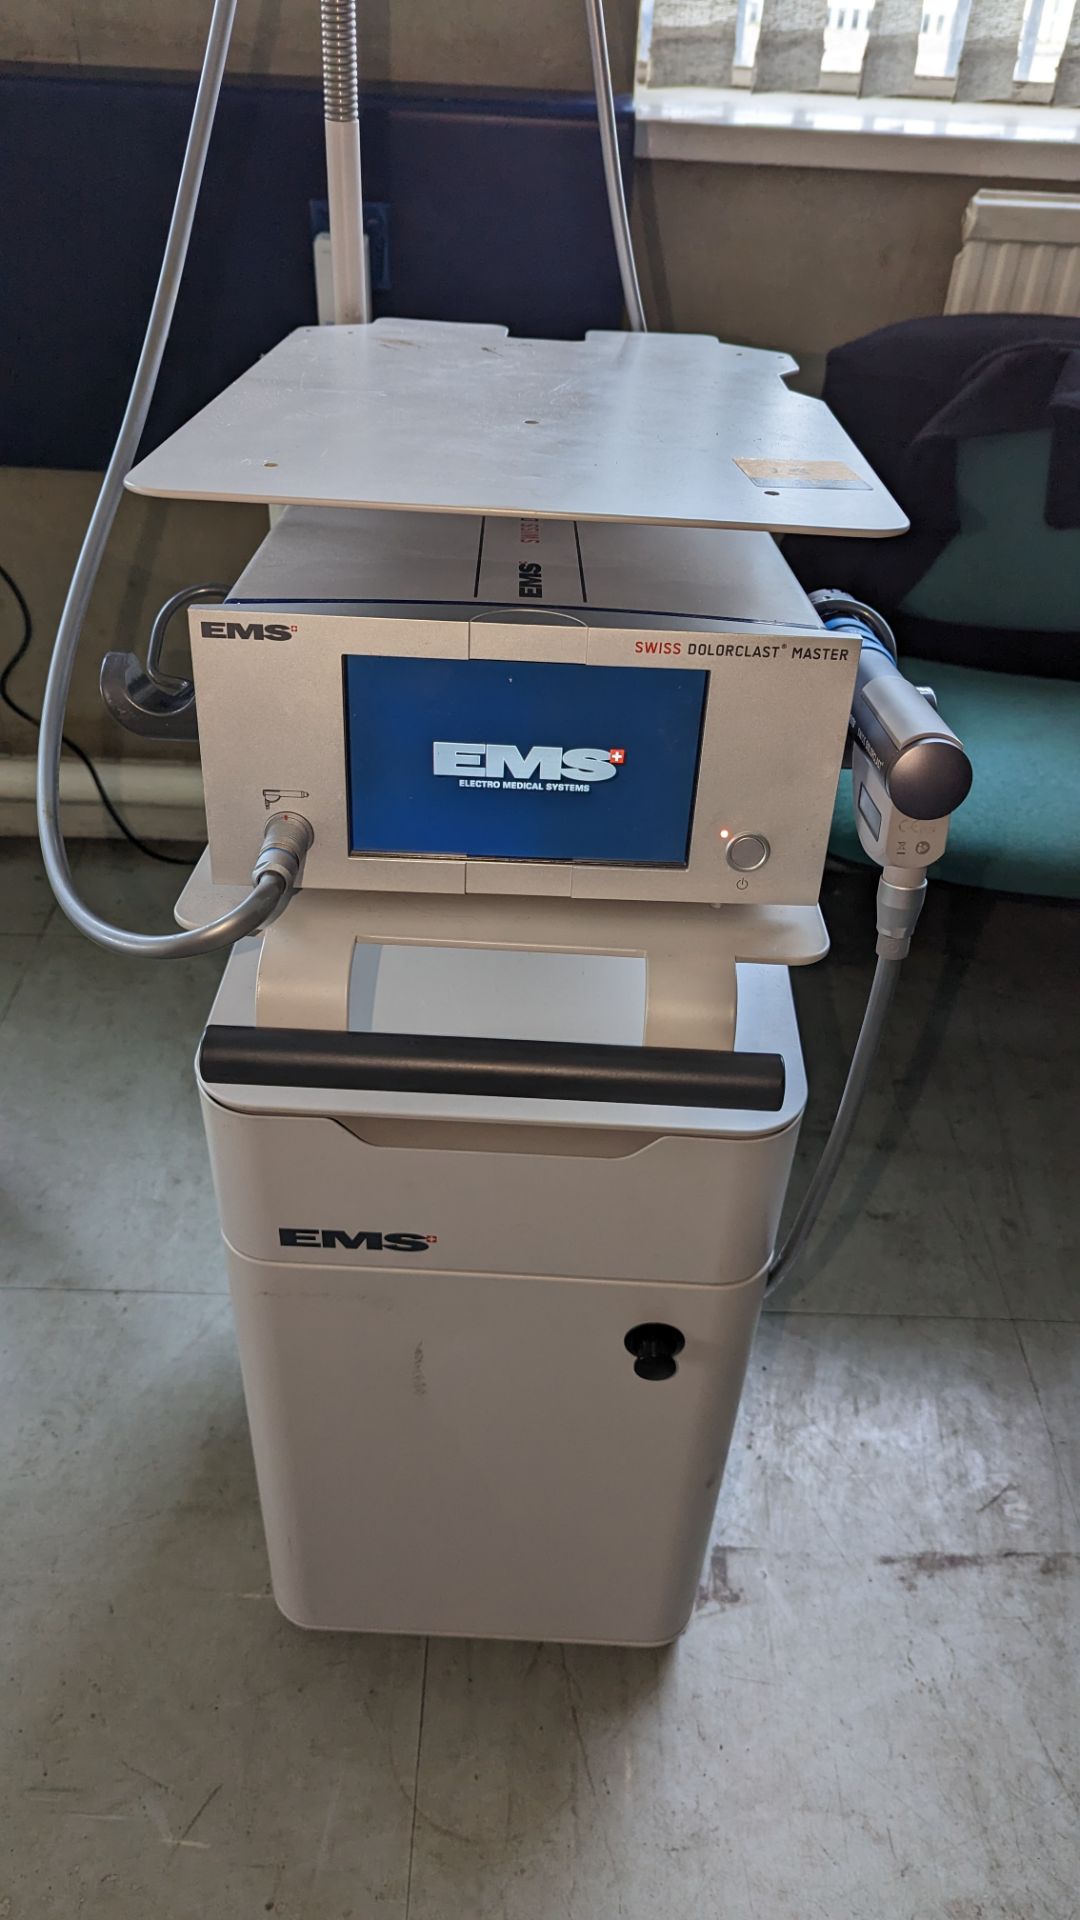 EMS Medical Swiss Dolorclast Master Shockwave system. This machine was purchased new in 2019 subjec - Image 4 of 30